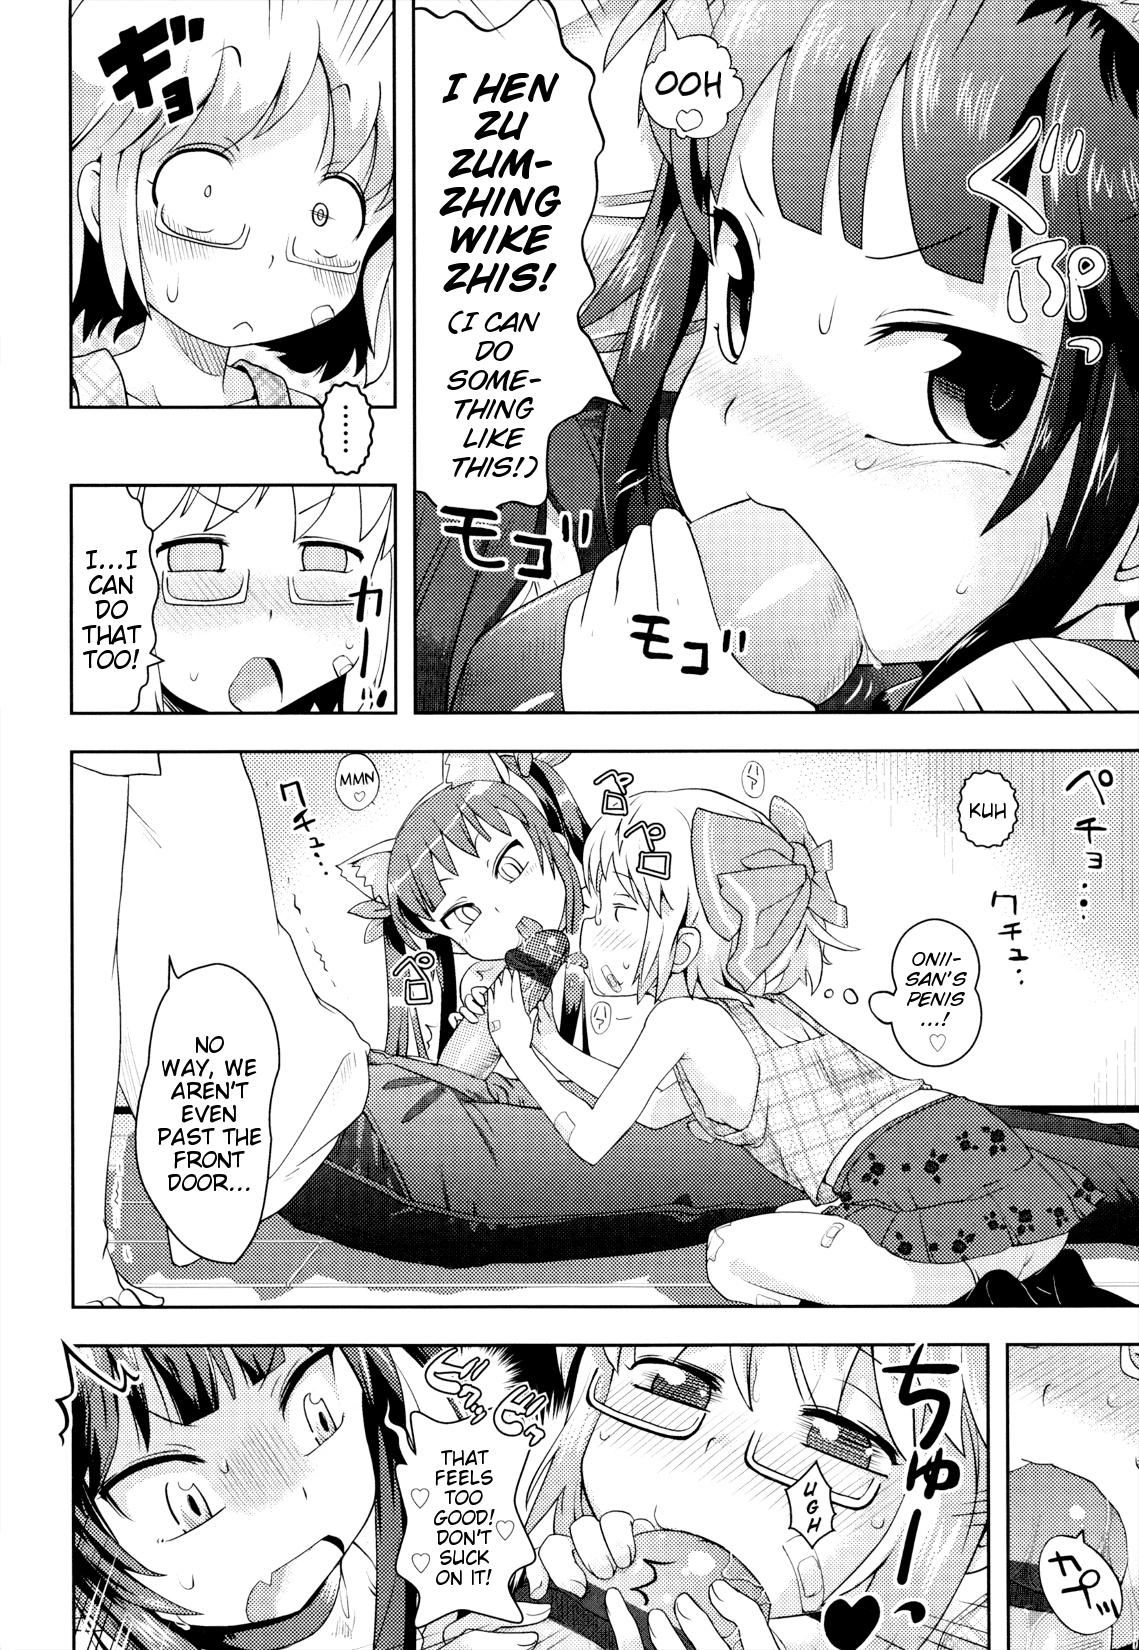 Euro Porn Gaw-Gaw! Imouto Security Her - Page 8